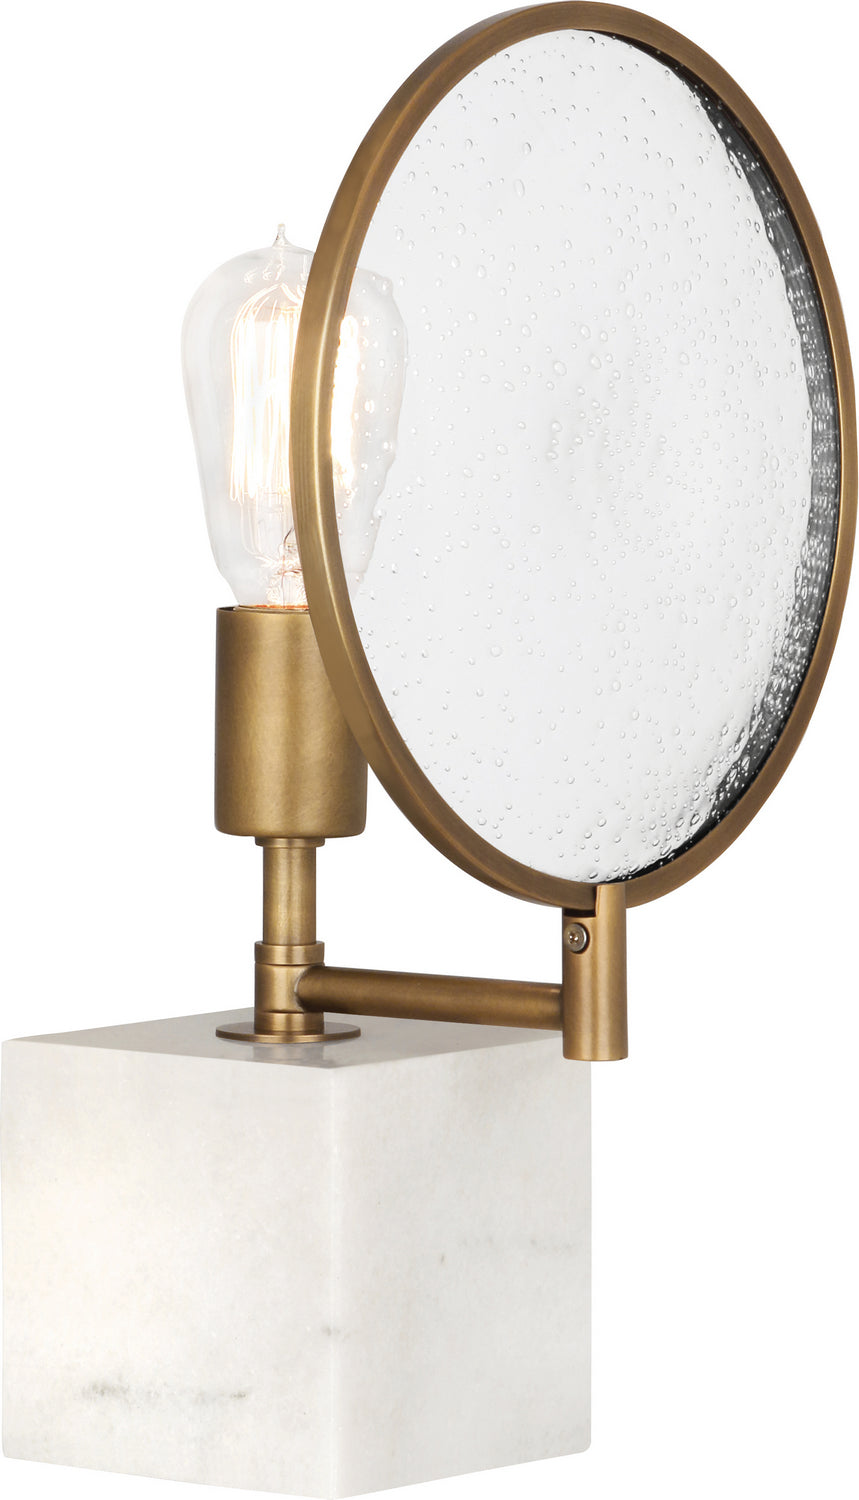 Robert Abbey - One Light Accent Lamp - Fineas - Alabaster Stone Base and Aged Brass- Union Lighting Luminaires Decor